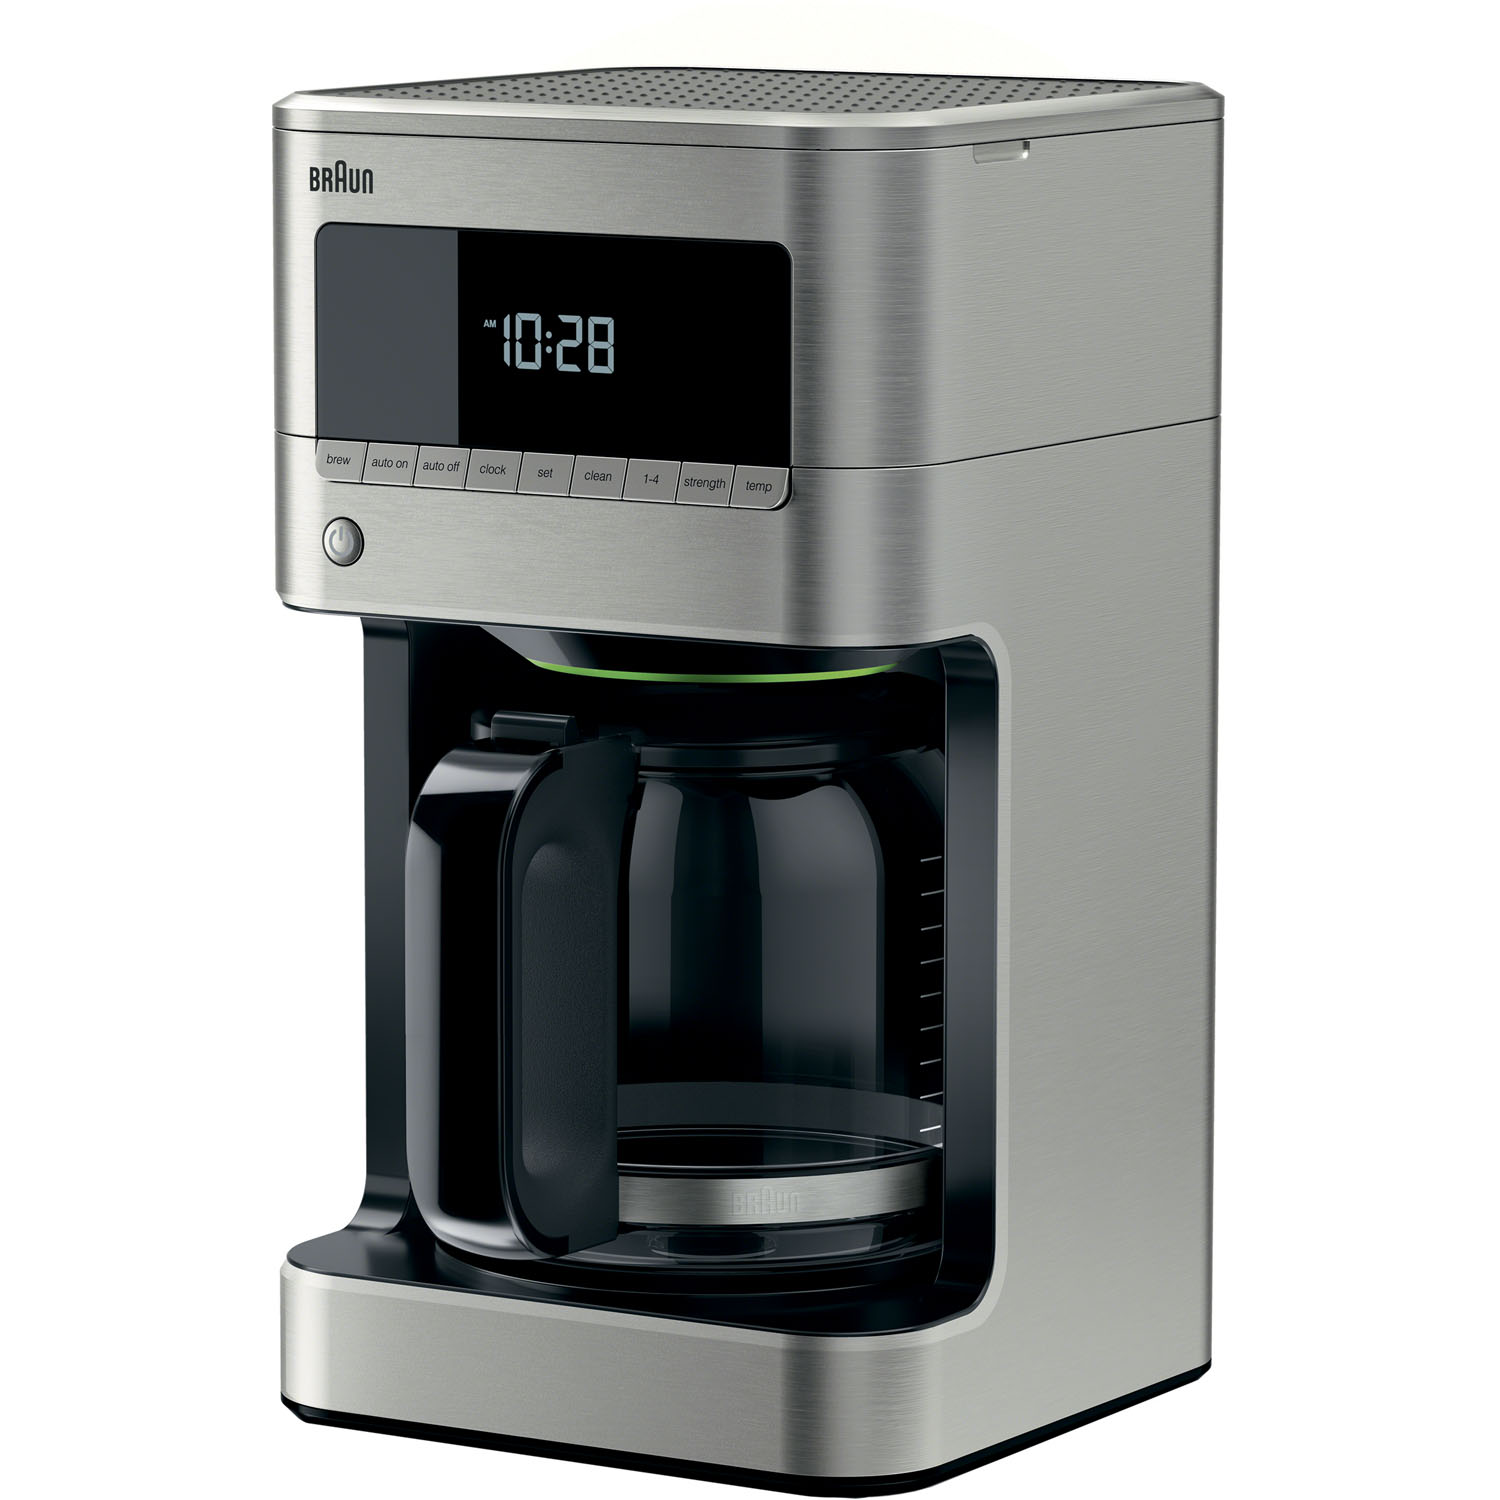 Braun Brew Sense 12-Cup Drip Coffee Maker with Glass Carafe - image 3 of 5